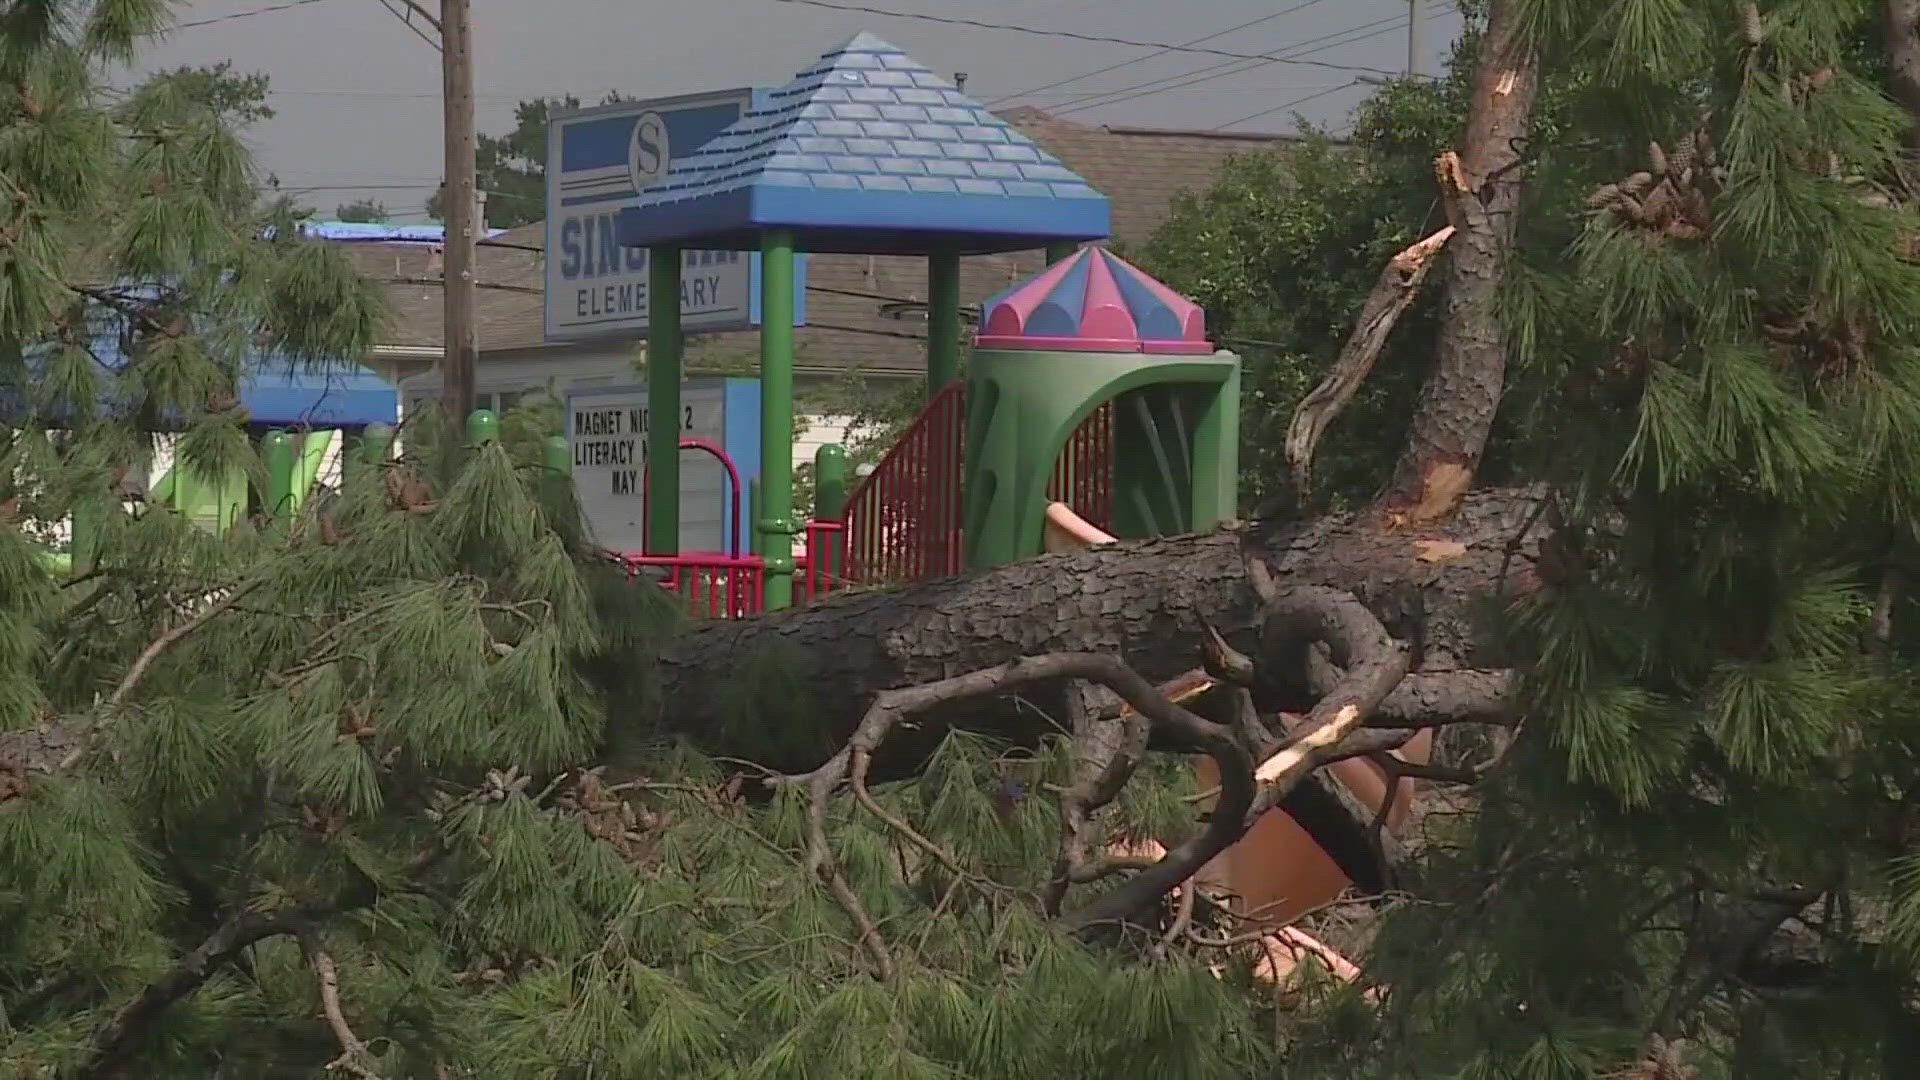 Communities in Texas and Oklahoma are working to clean up damage and get the lights back on after devastating storms.